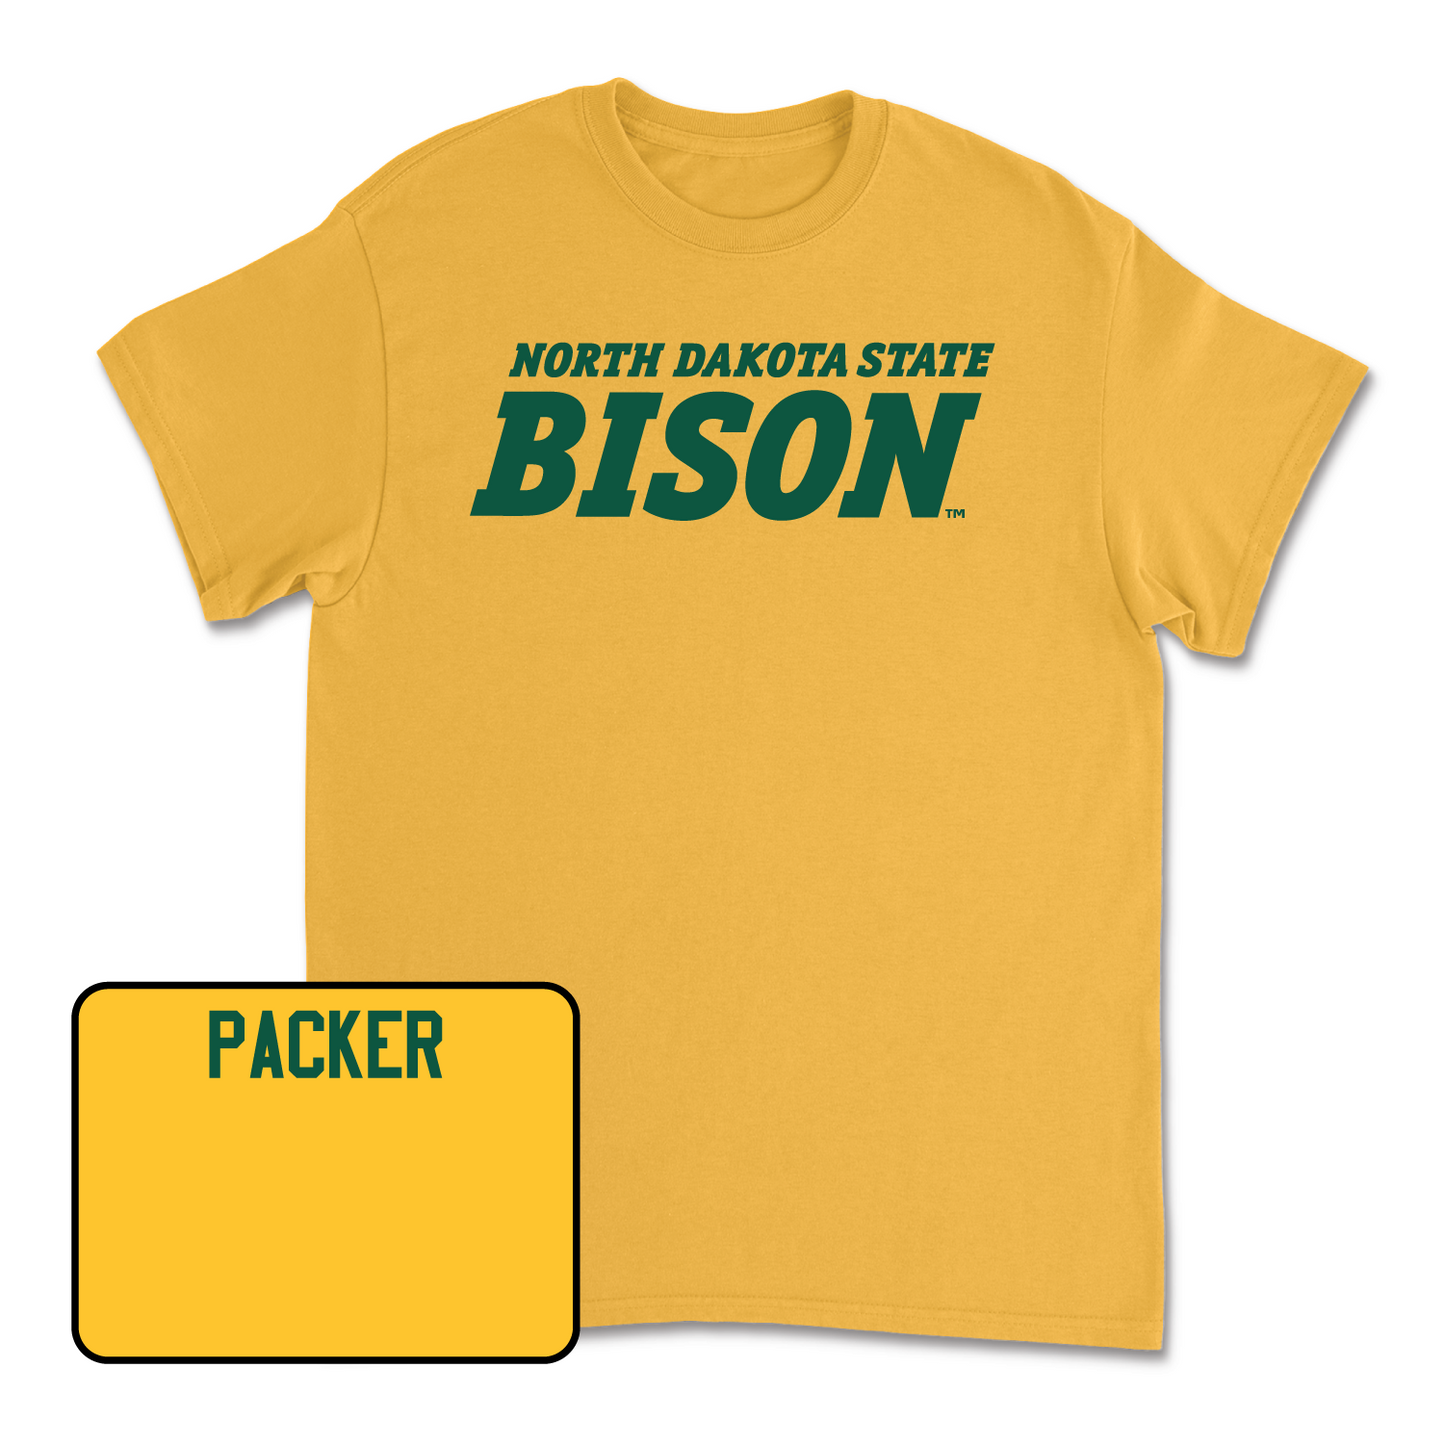 Gold Track & Field Bison Tee 4X-Large / Jack Packer